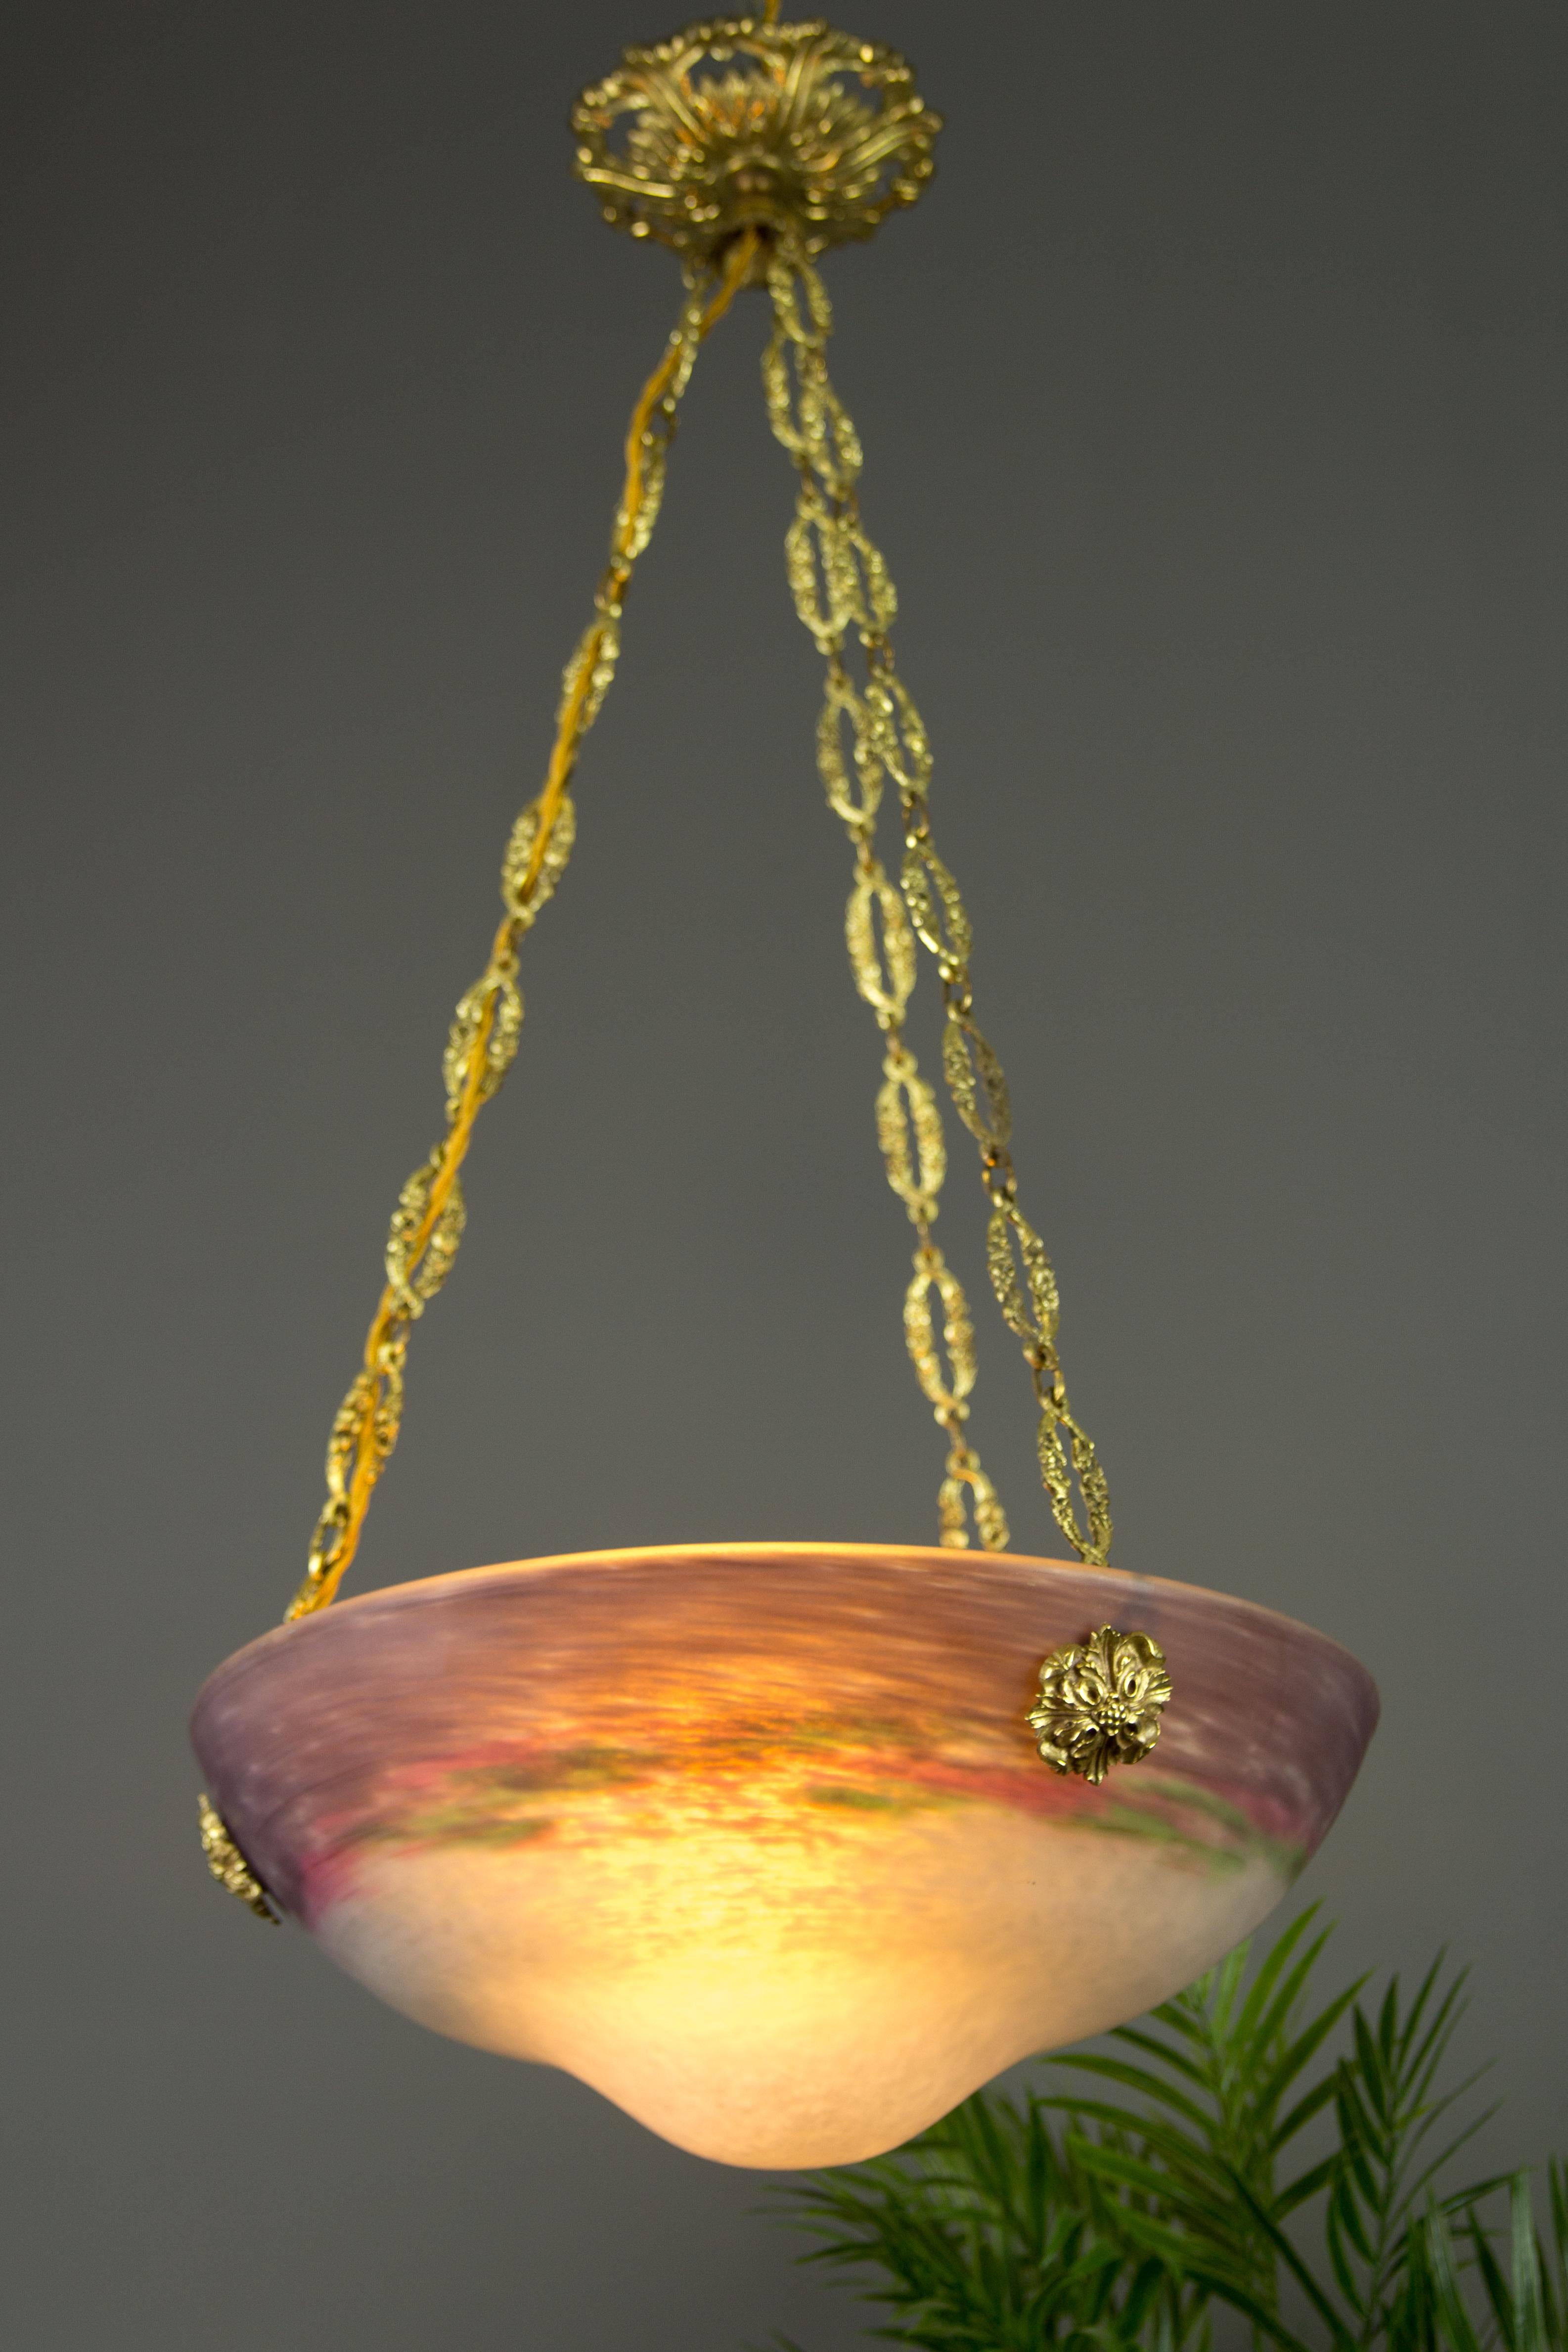 Early 20th Century French Art Nouveau Glass Bowl Pendant Chandelier Signed by Muller Frères, 1920s For Sale